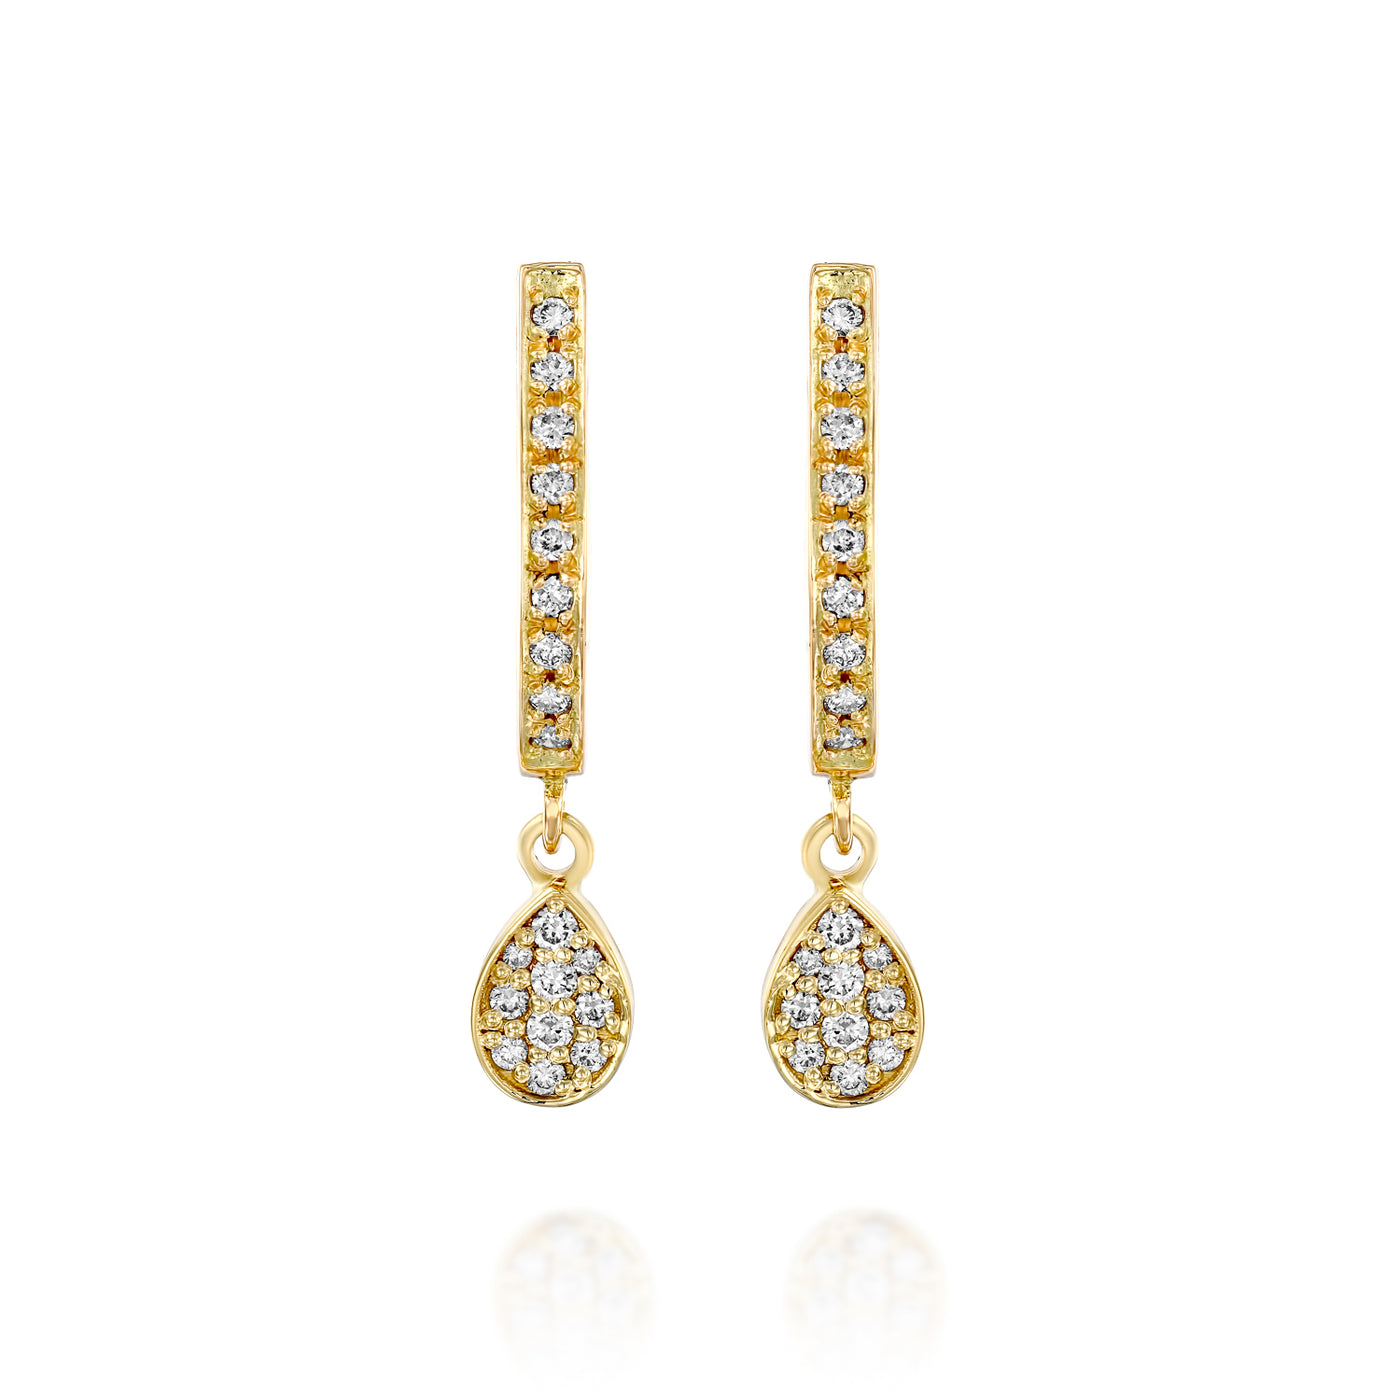 These minimalist solid 14K gold diamond charm dangle earrings are the perfect bridal teardrop solid gold drop earrings.